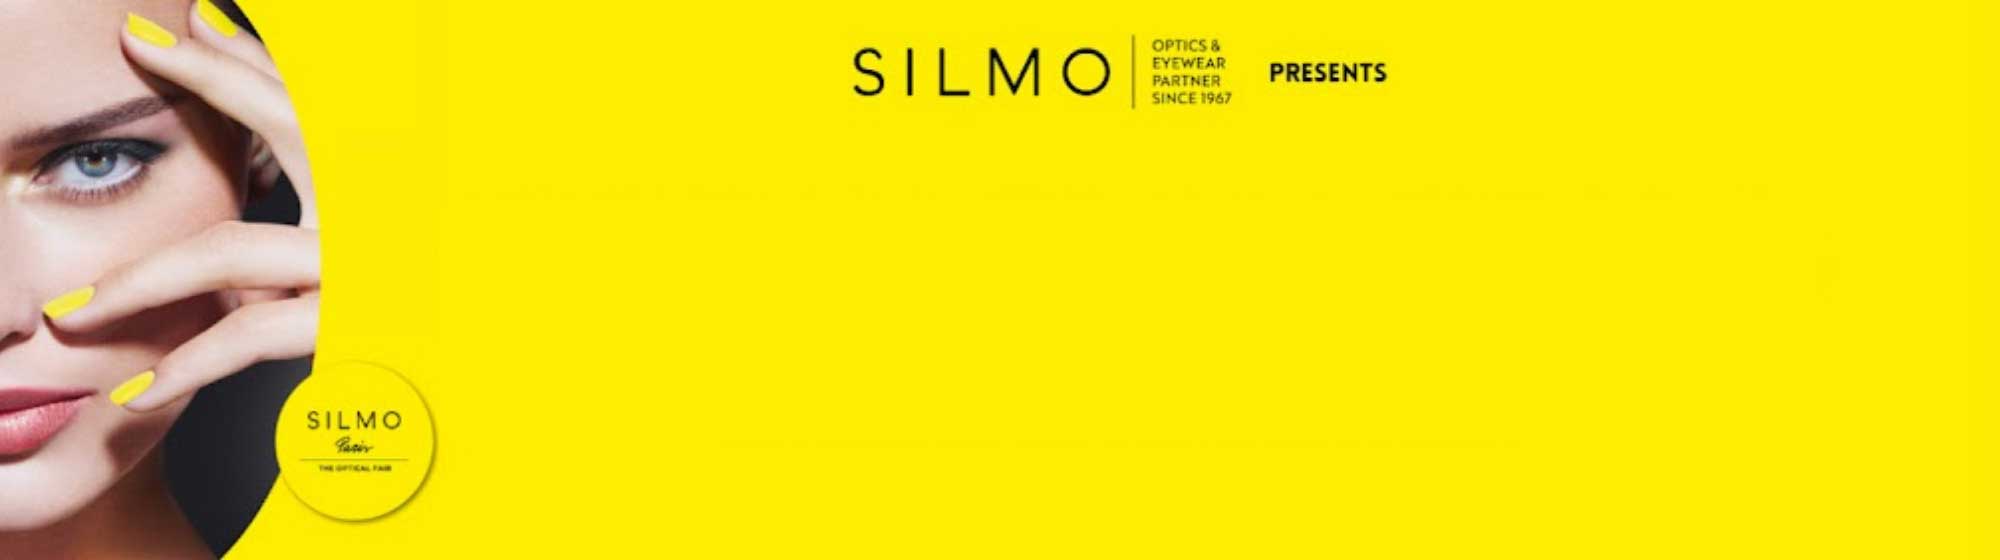 Banner with SILMO logo